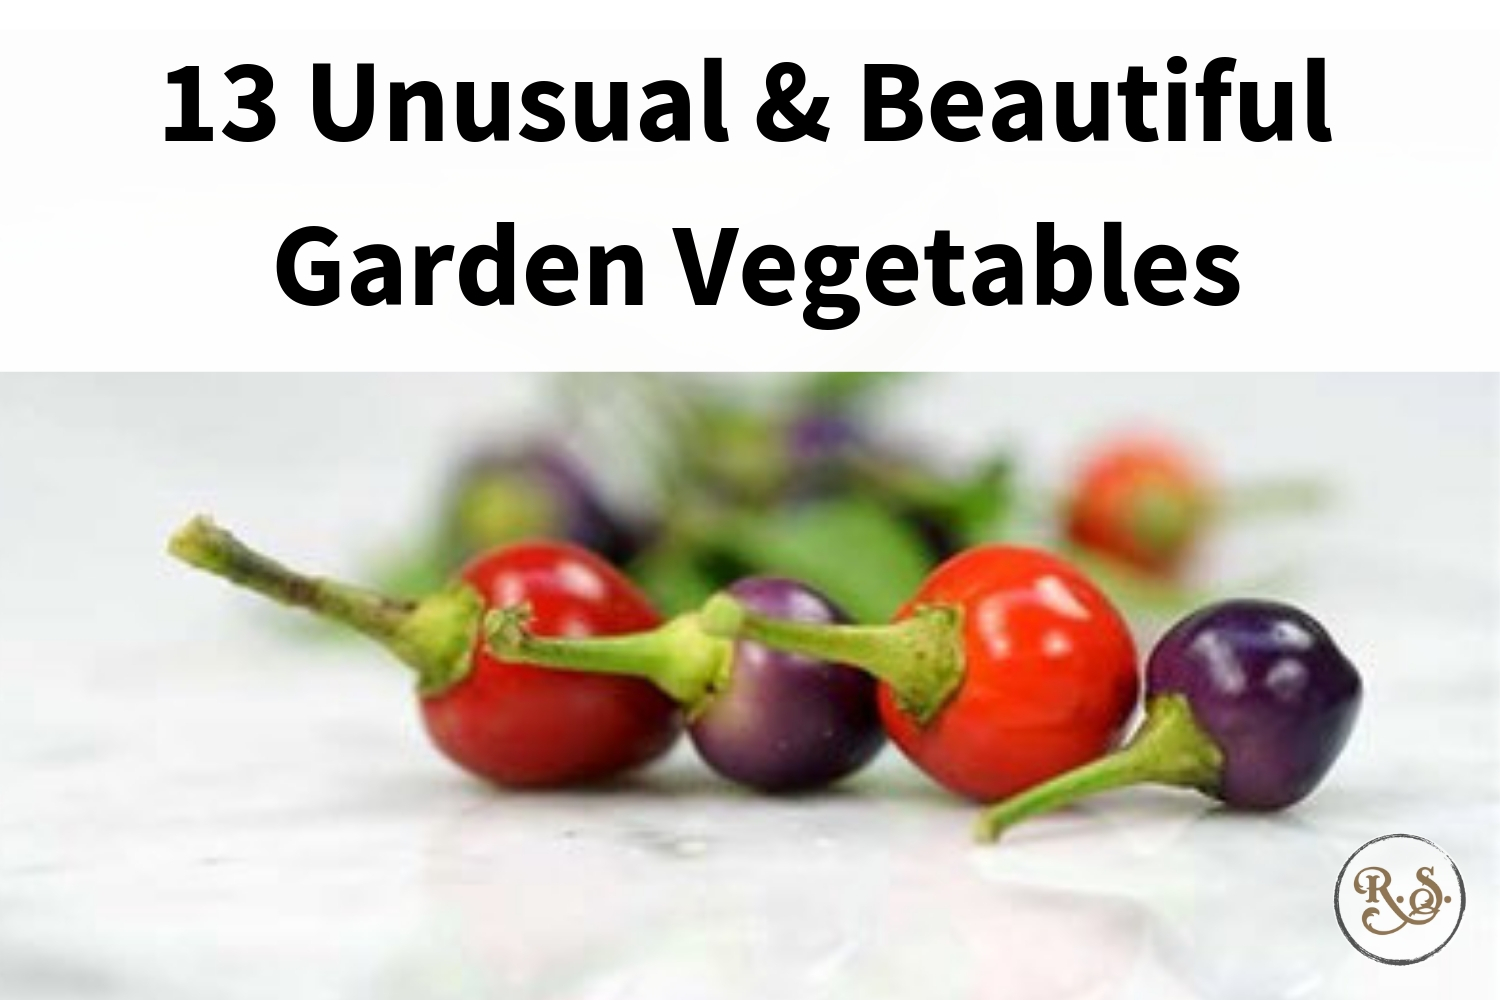 Unusual garden vegetables are a great way to have produce coming from your garden with character and unique variety. #unusualvegetables #togrow #gardening